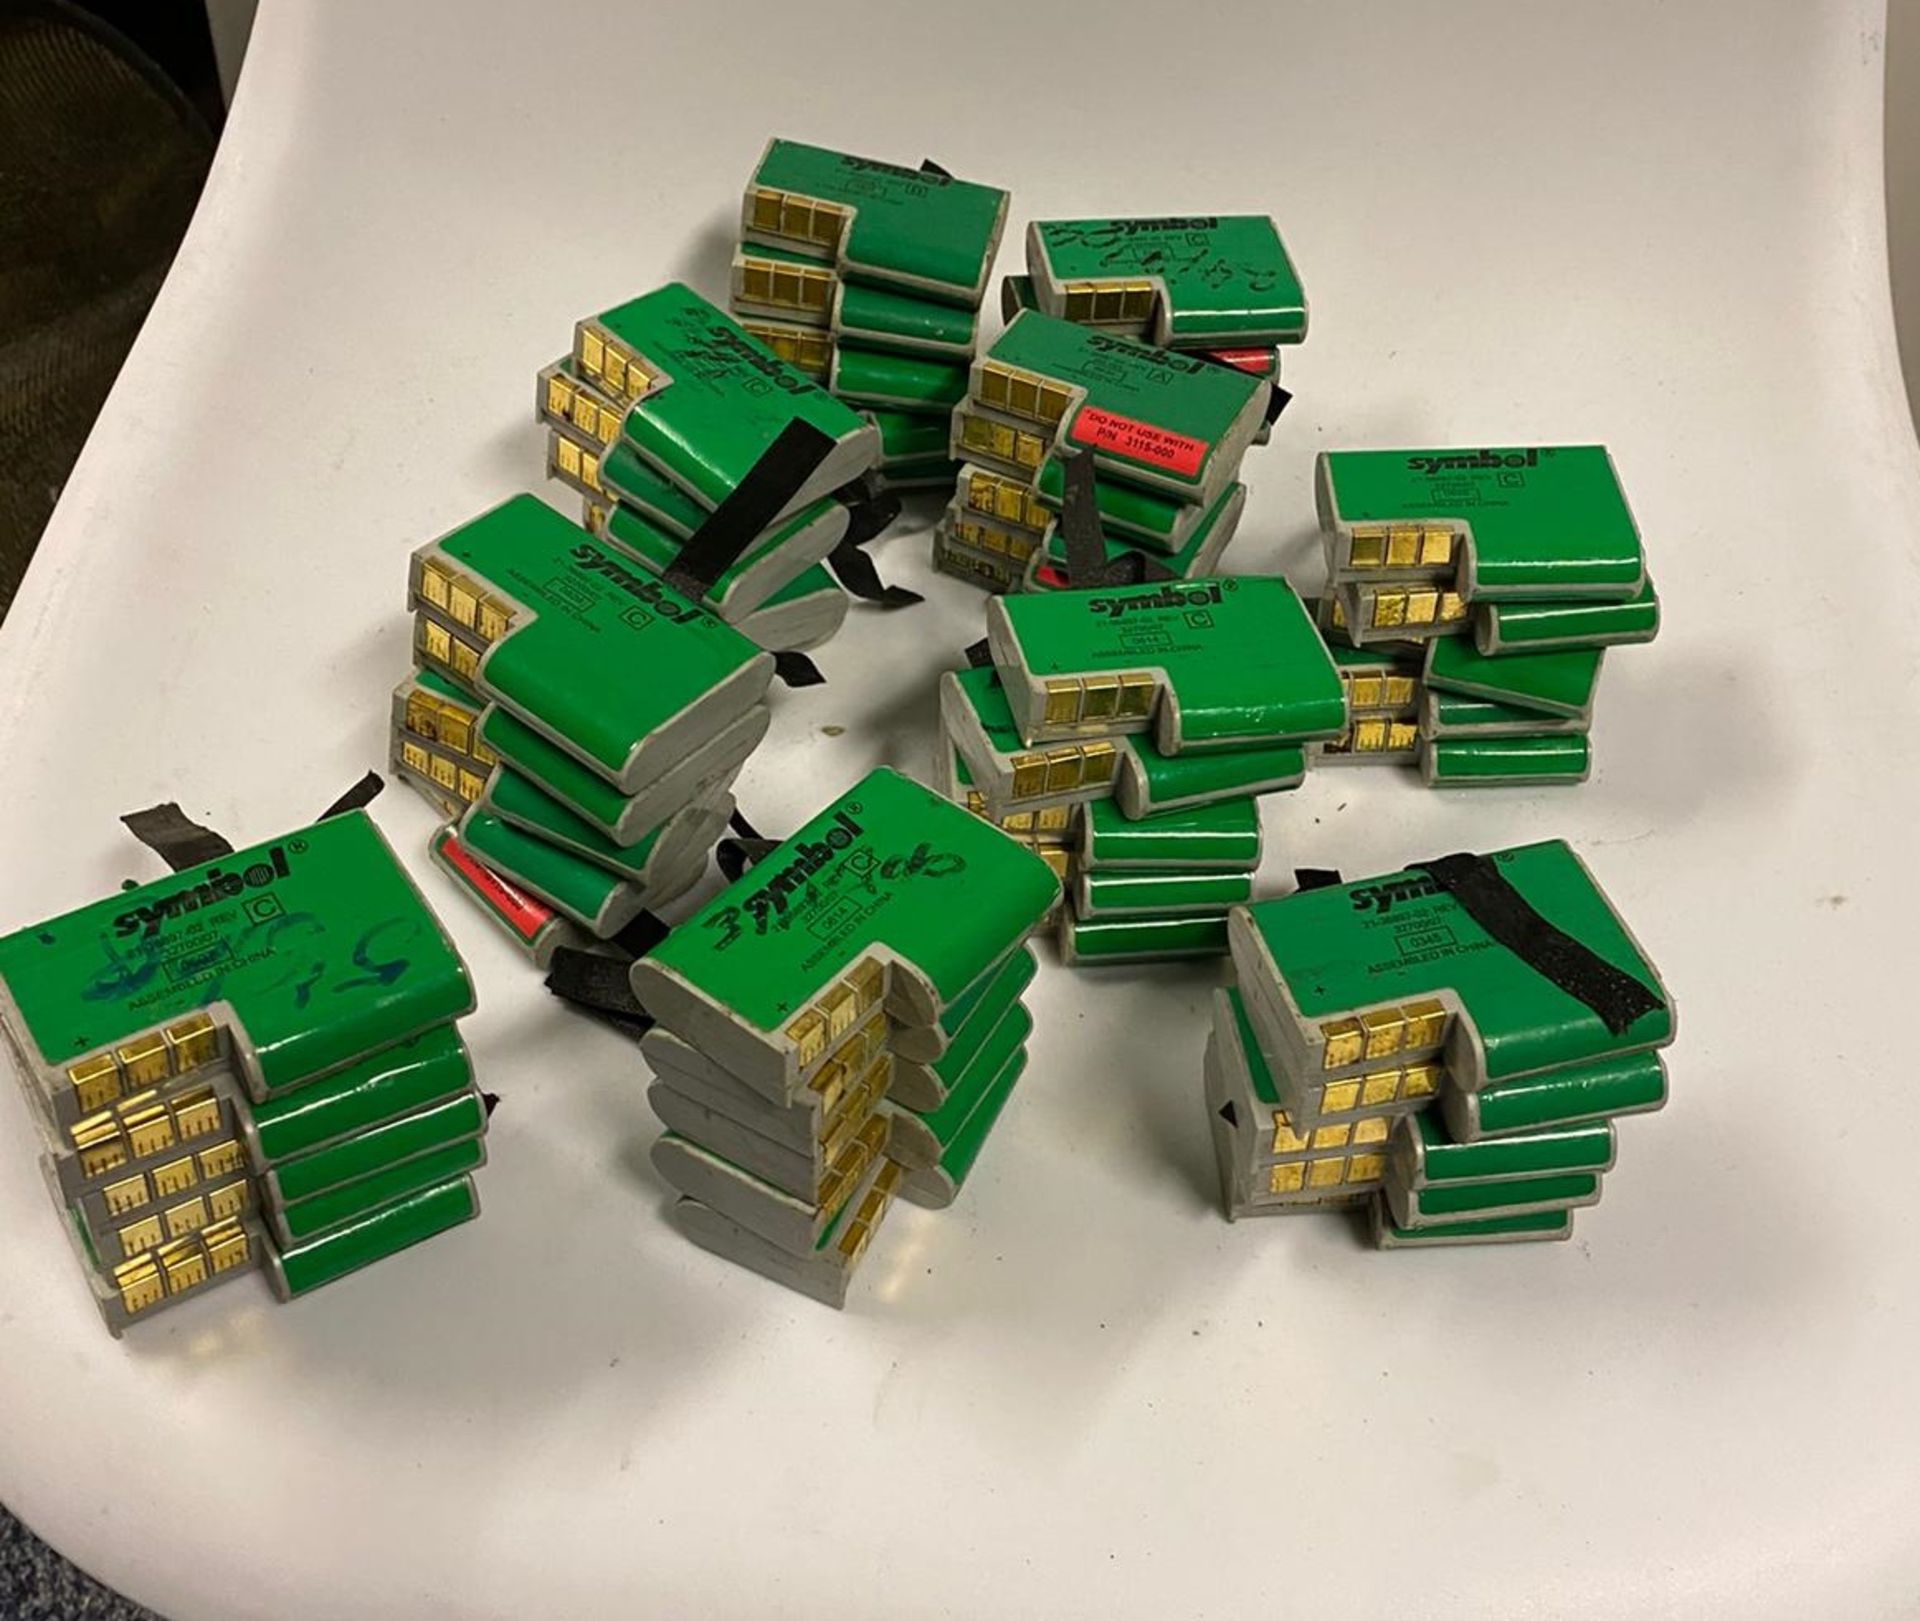 5 x Symbol 21-36897-02 Rechargeable 6.0V Batteries - Used Condition - Location: Altrincham WA14 - Image 2 of 5